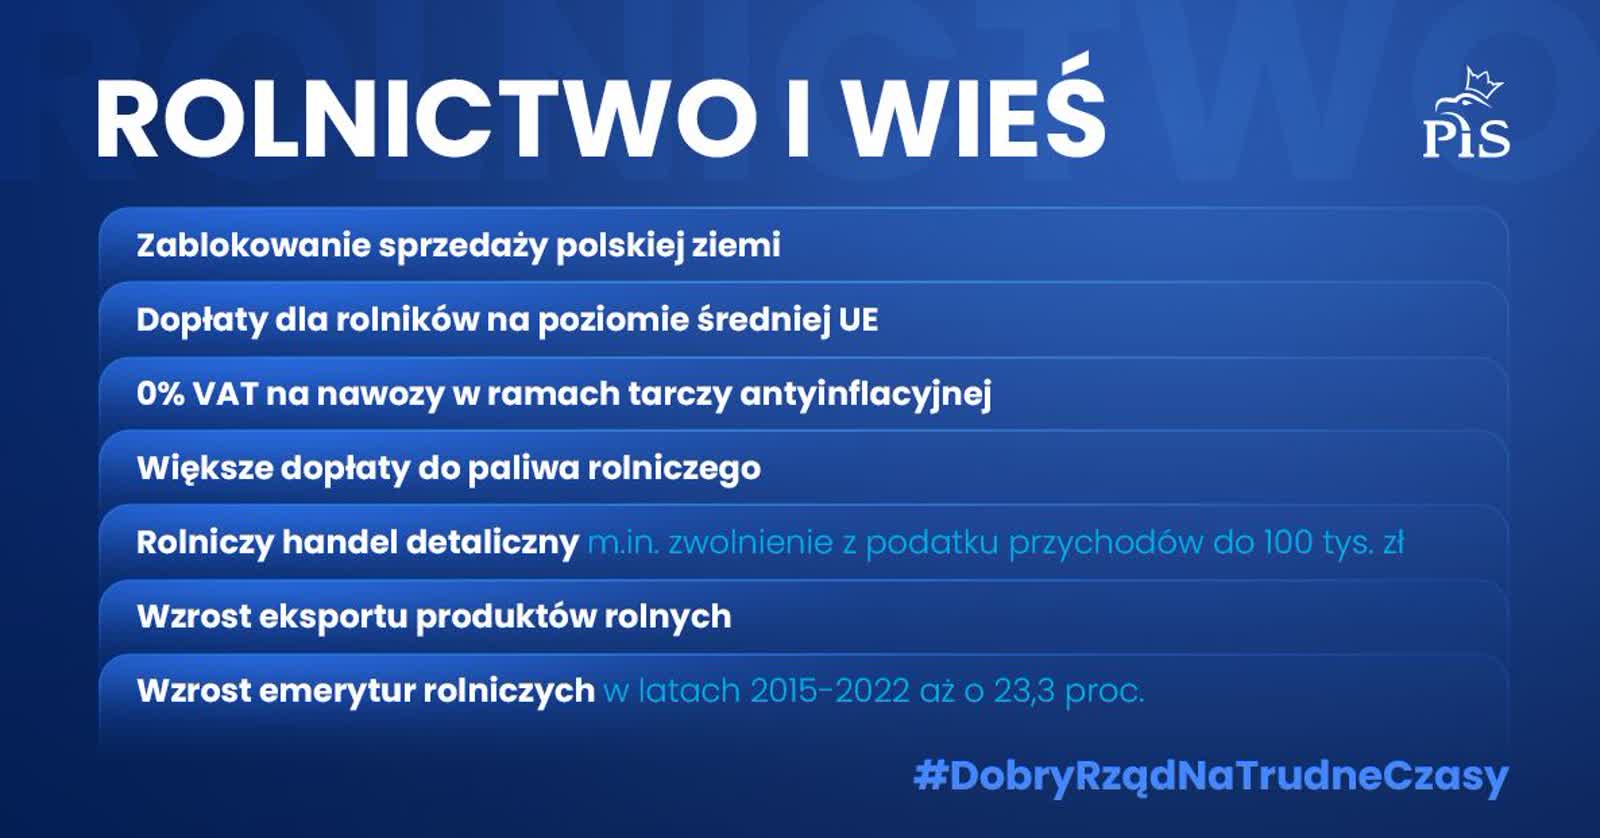 pis rolnictwo.JPG